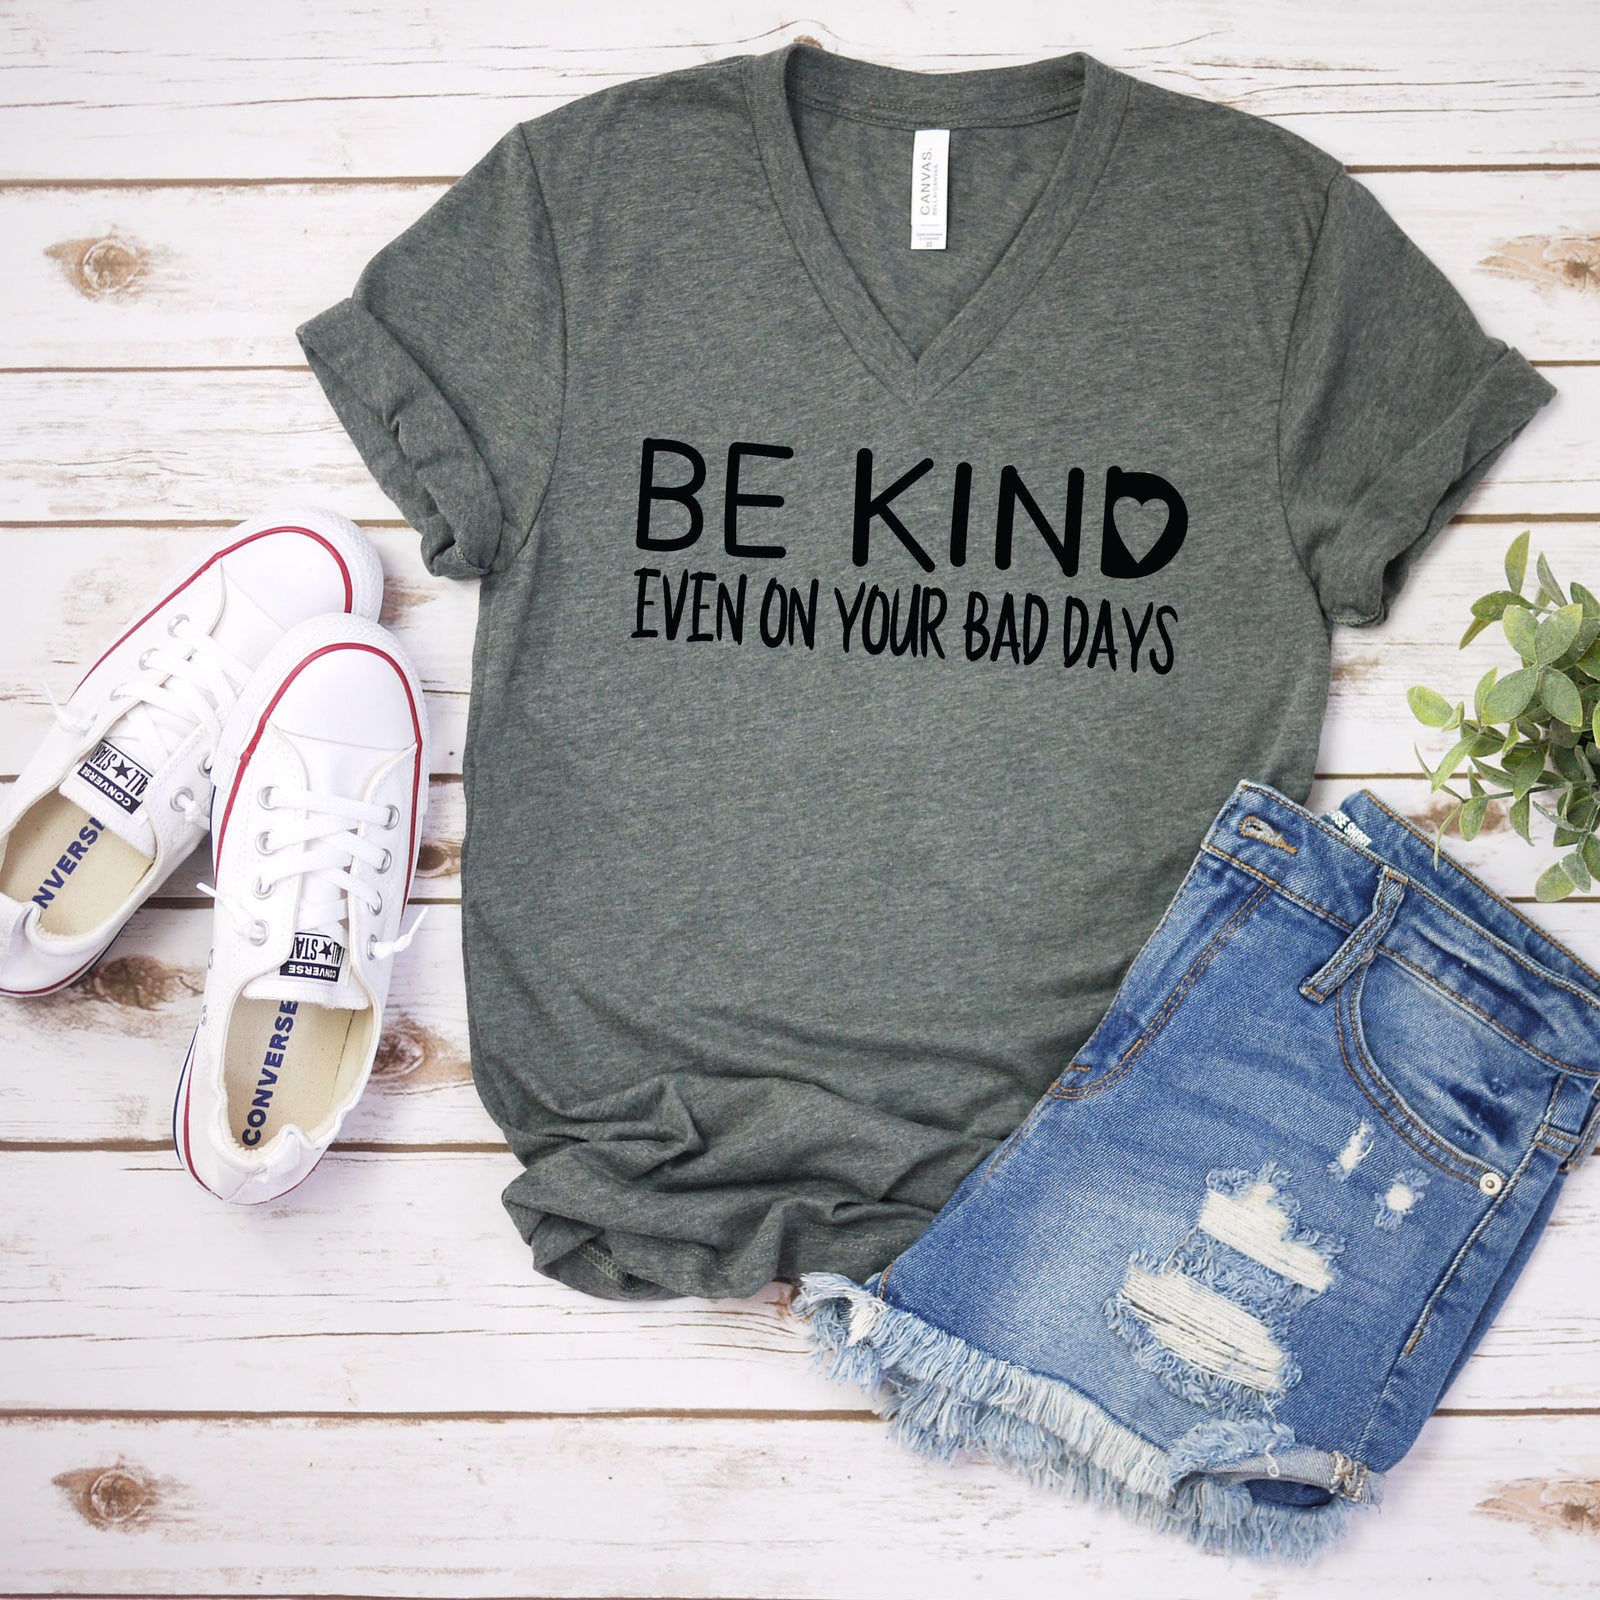 Be Kind T Shirt - Be Kind Even on your Bad Days - Motivational T Shirt - Values Matter T Shirt